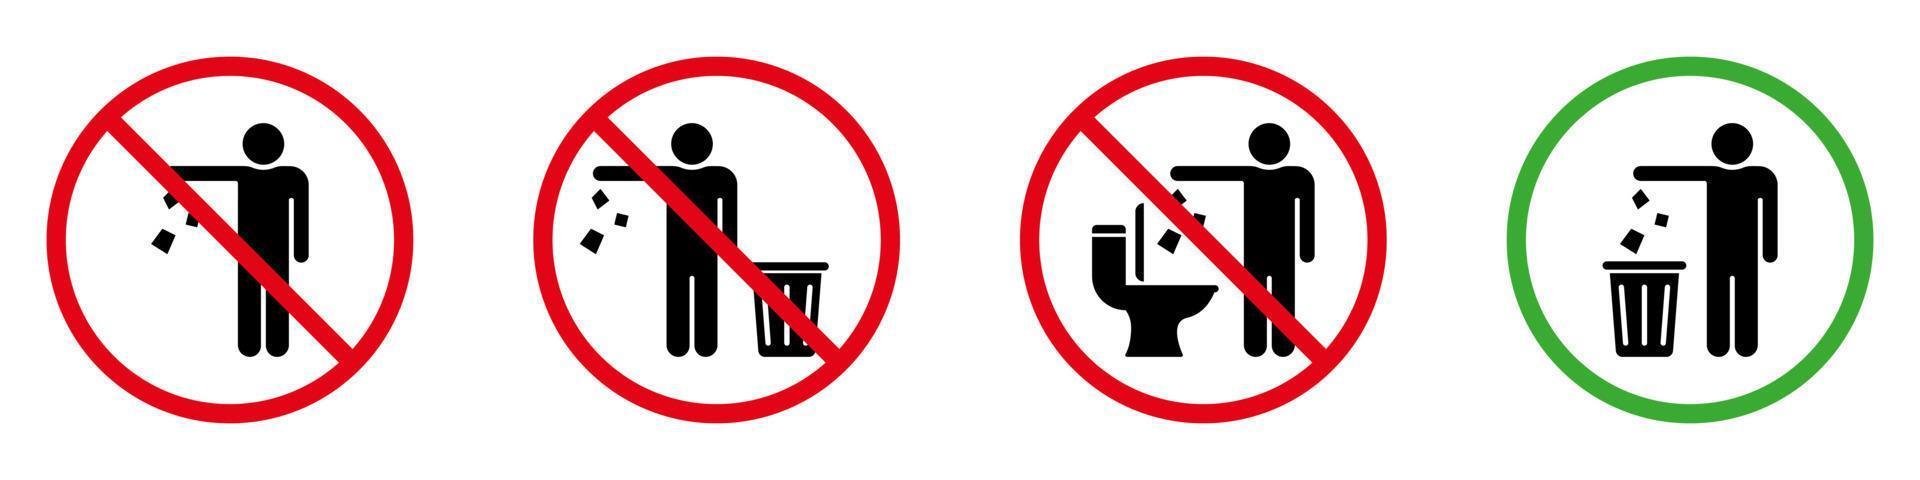 Keep Clean Silhouette Sign. Allowed Throw Rubbish, Waste, Garbage in Bin Symbol. Do Not Throw Trash in Toilet Glyph Icon. Warning Please Drop Litter in Bin Sticker. Isolated Vector Illustration.